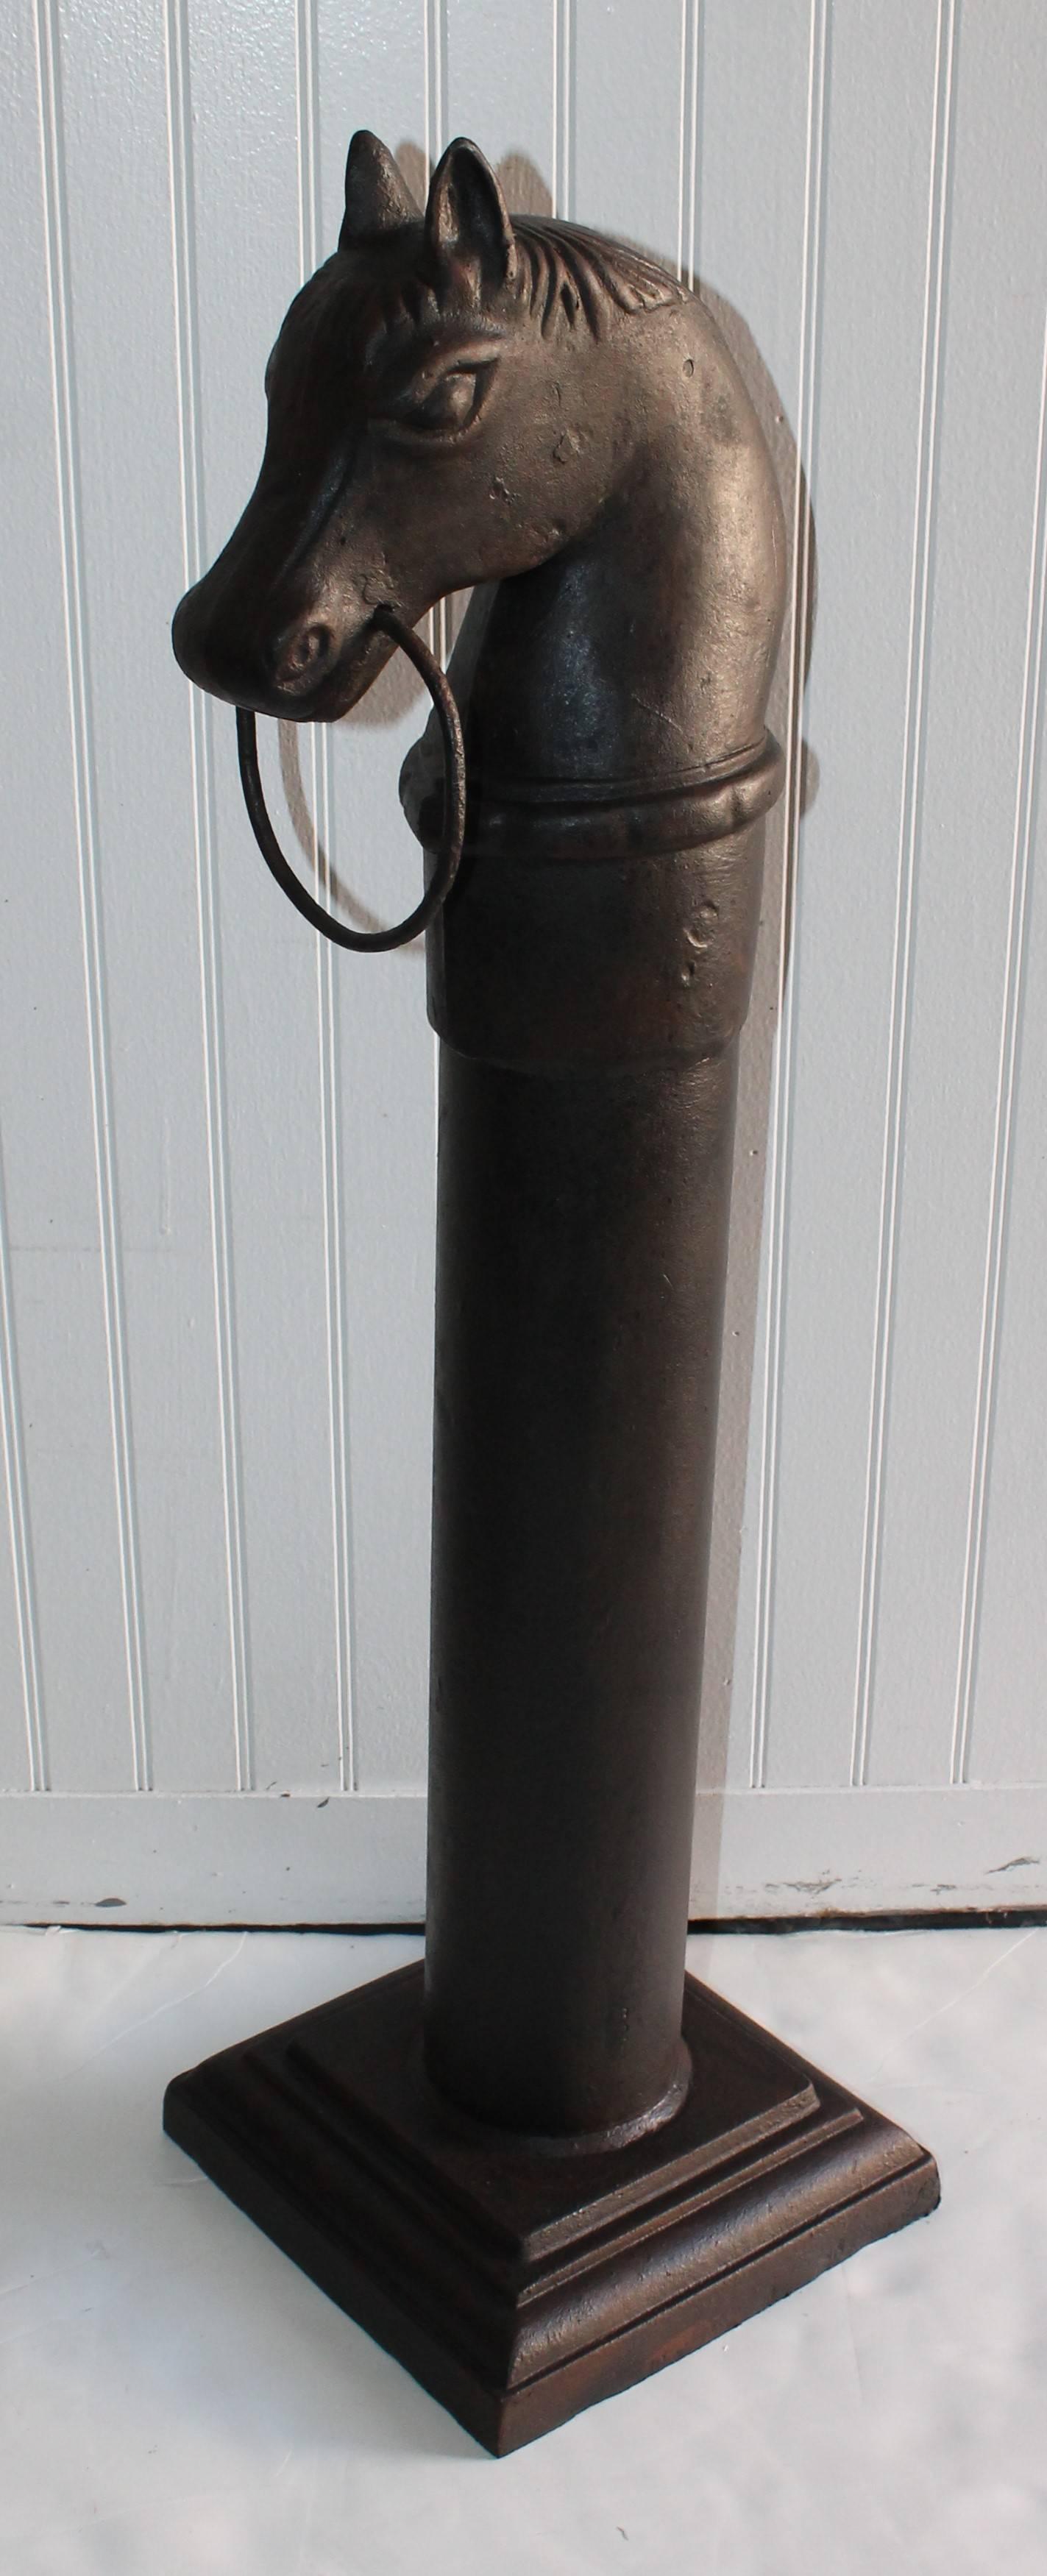 19th century cast iron hitching post in old painted black surface. The condition is very good and sturdy. So unusual to see the hitching post with the original iron base.